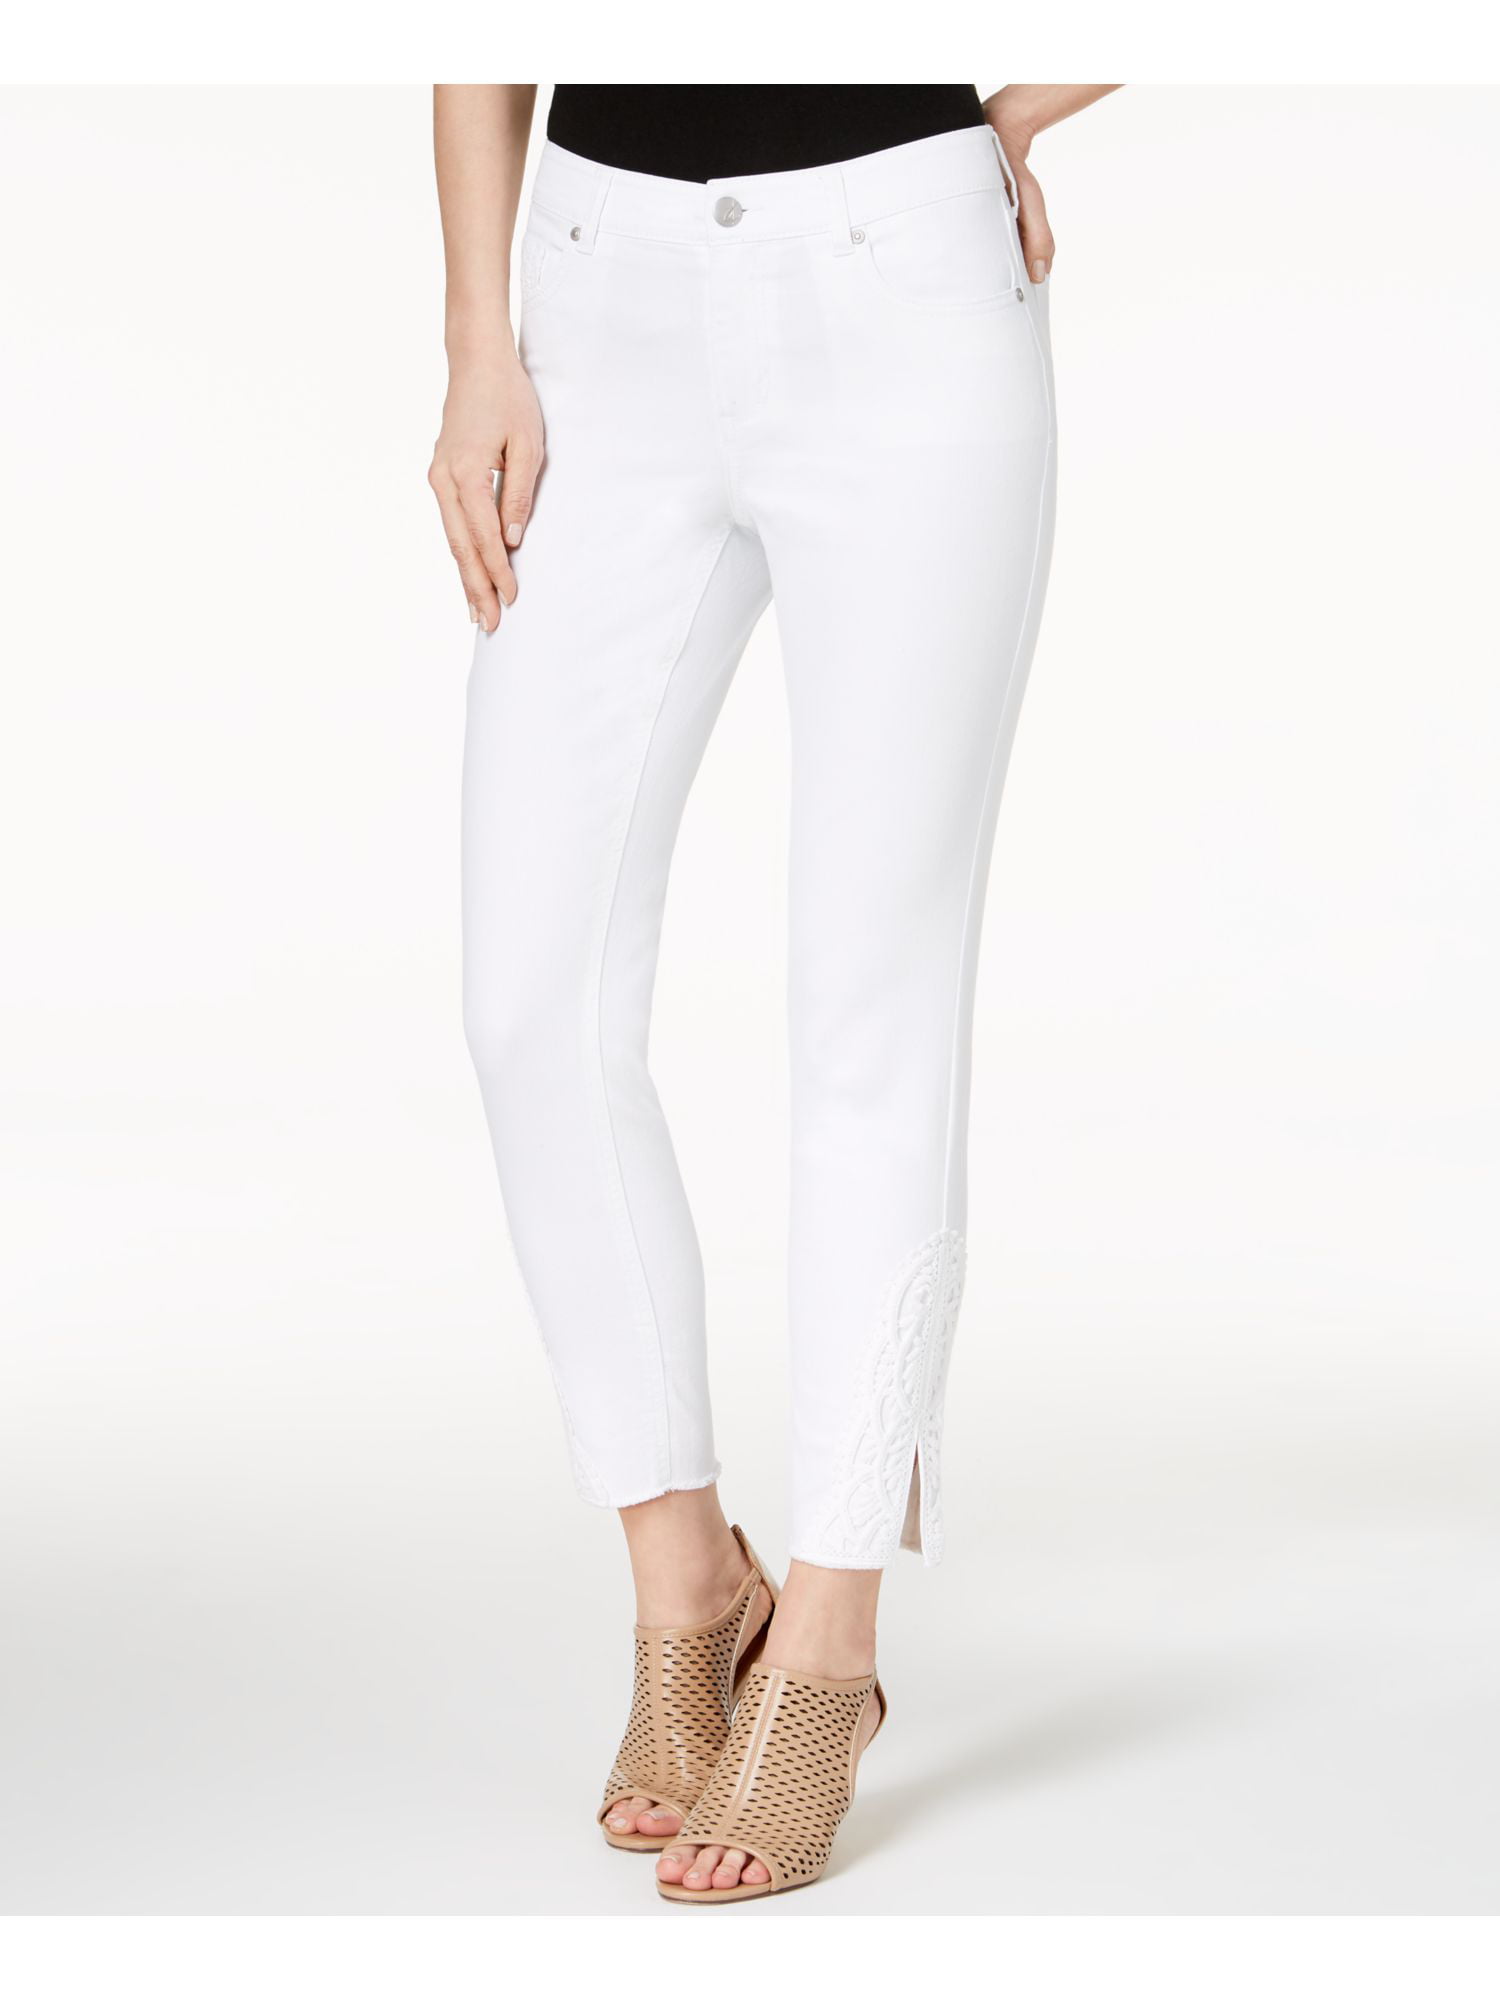 white jeans size 14